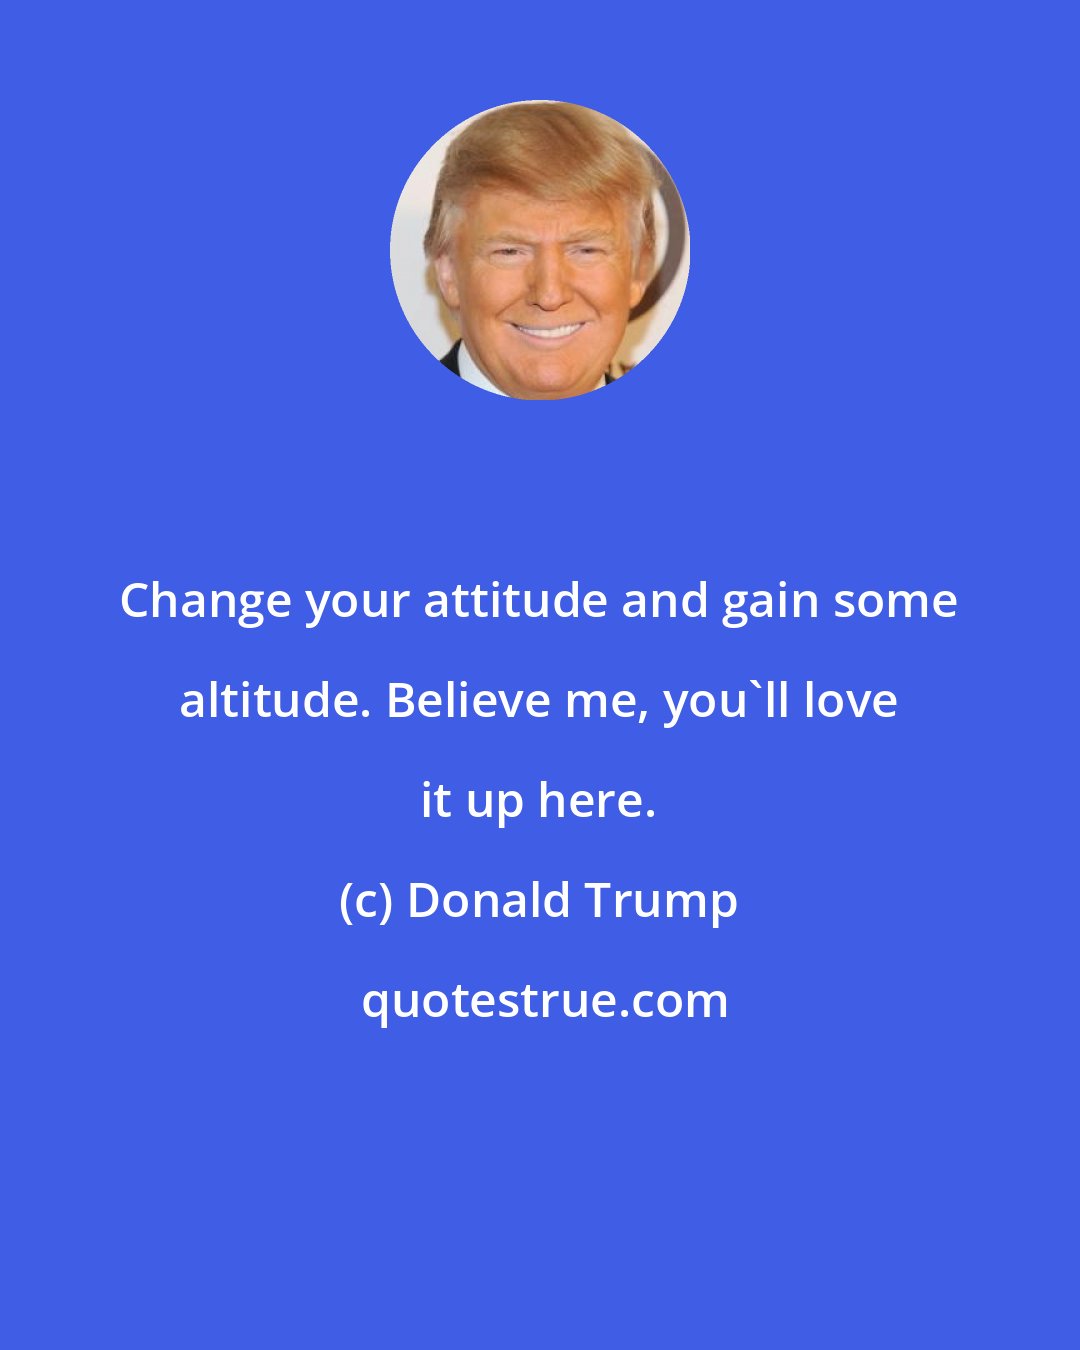 Donald Trump: Change your attitude and gain some altitude. Believe me, you'll love it up here.